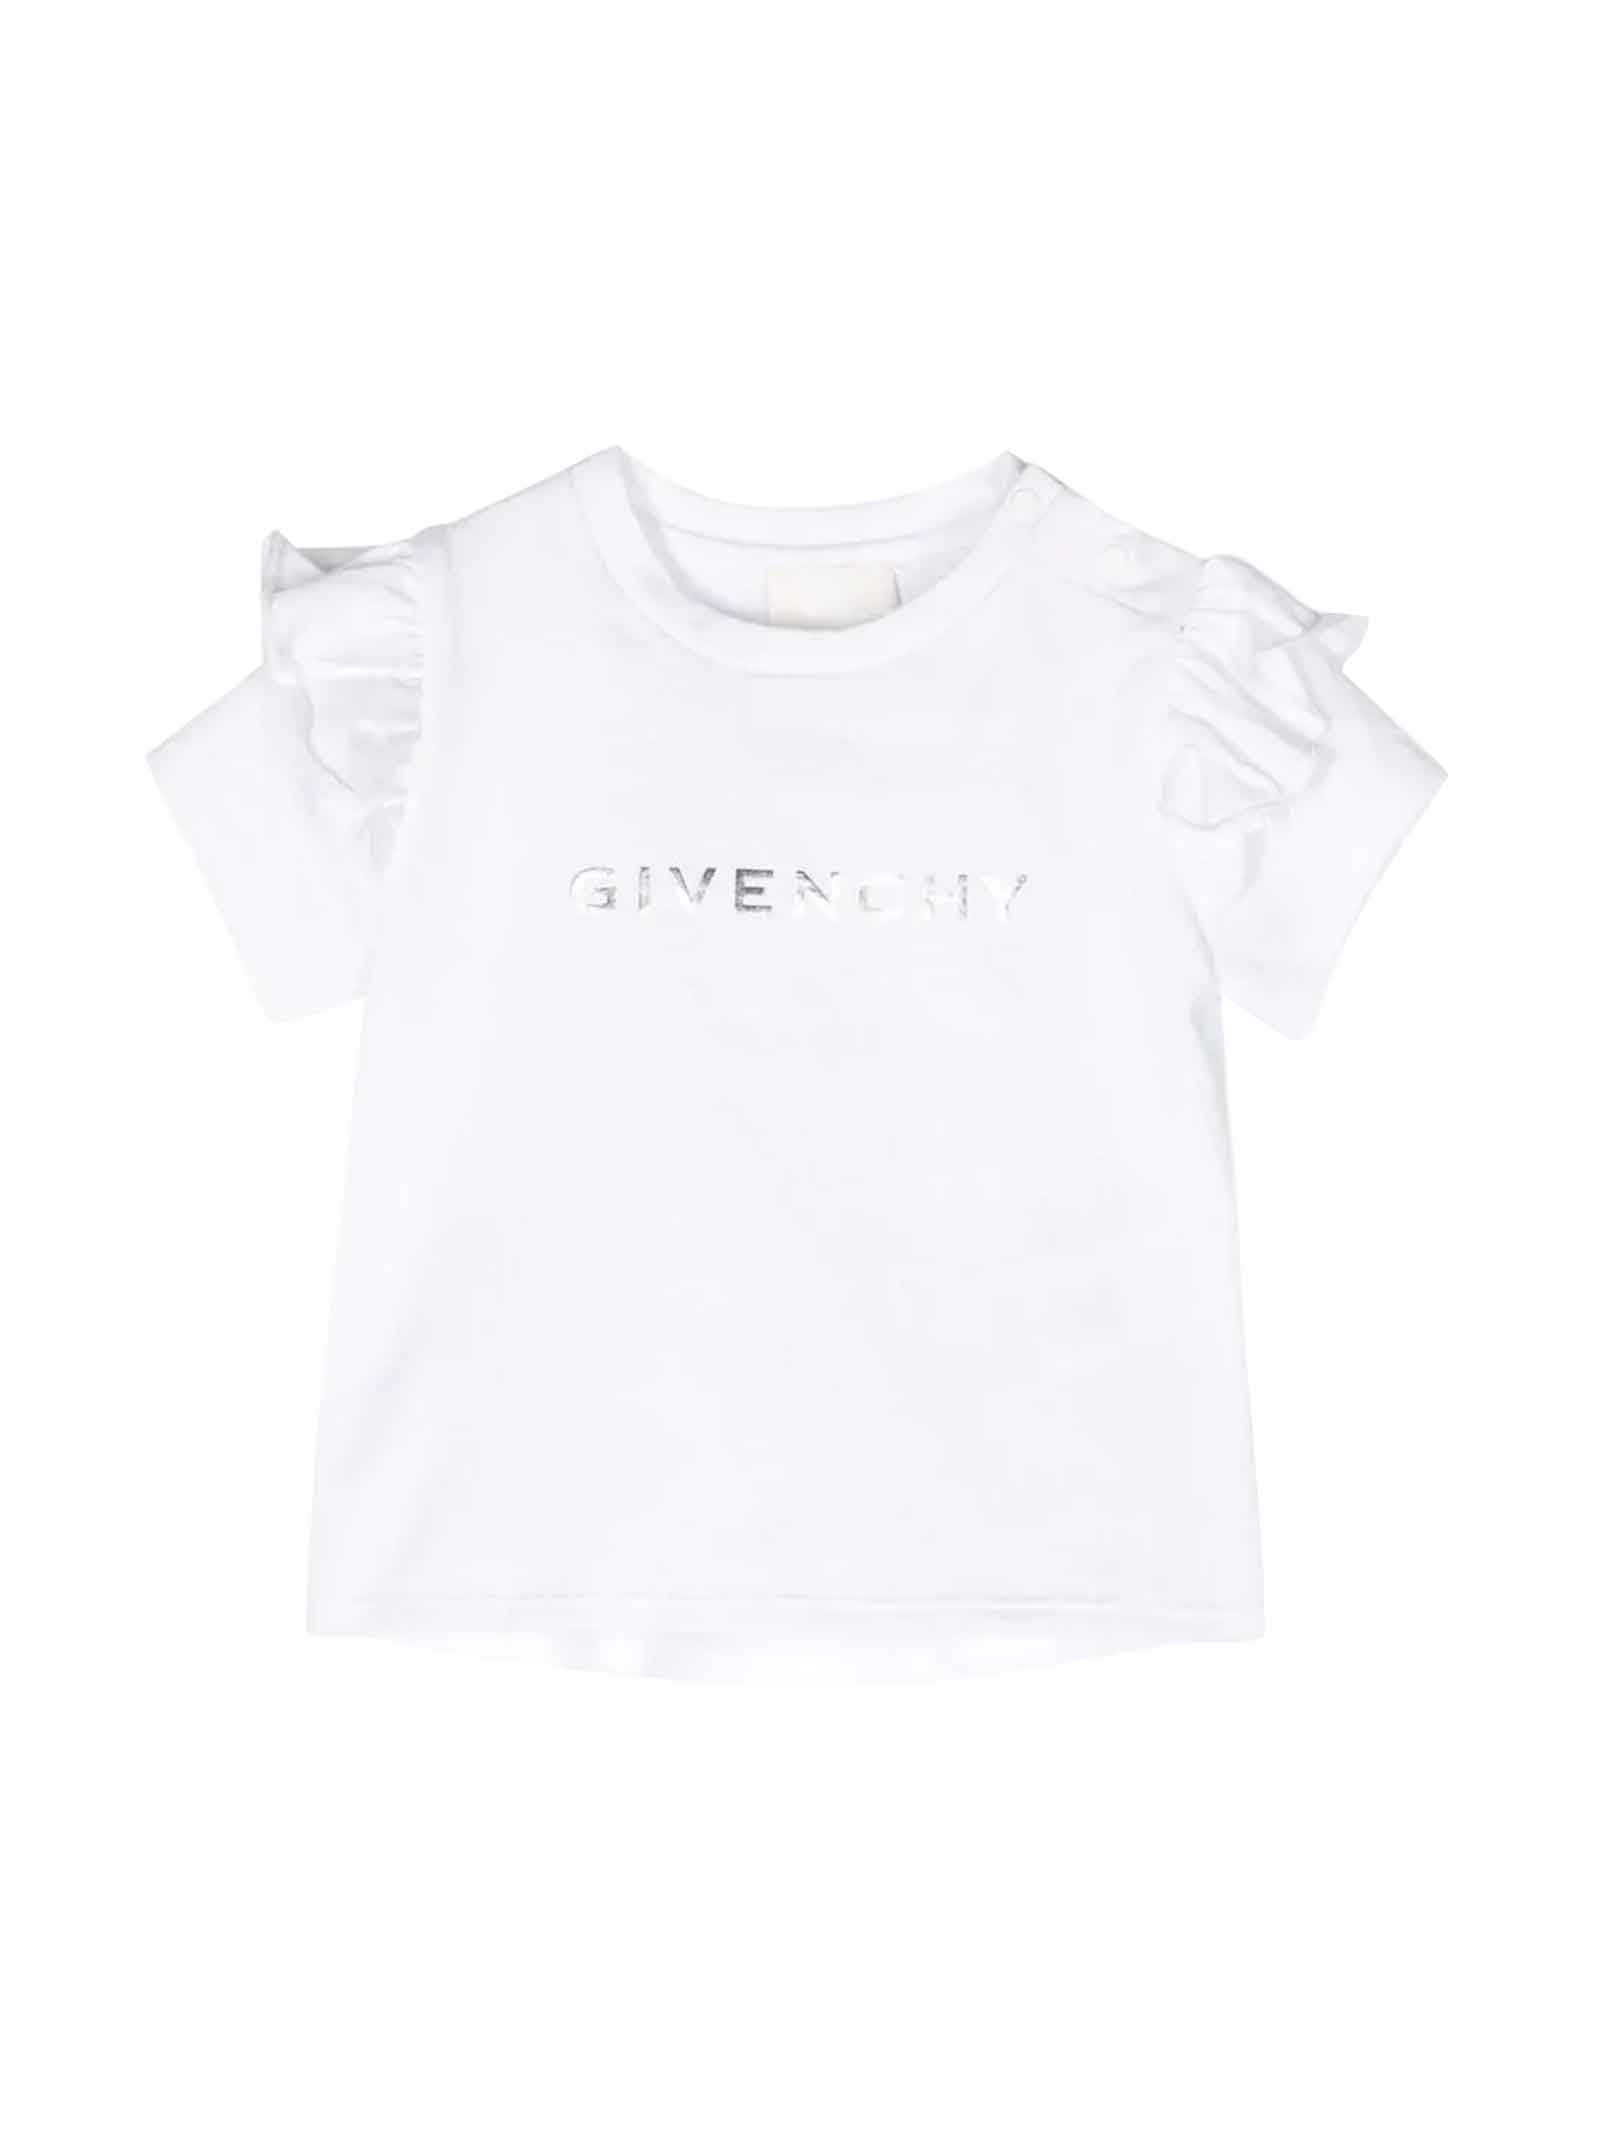 GIVENCHY WHITE T-SHIRT BABY GIRL